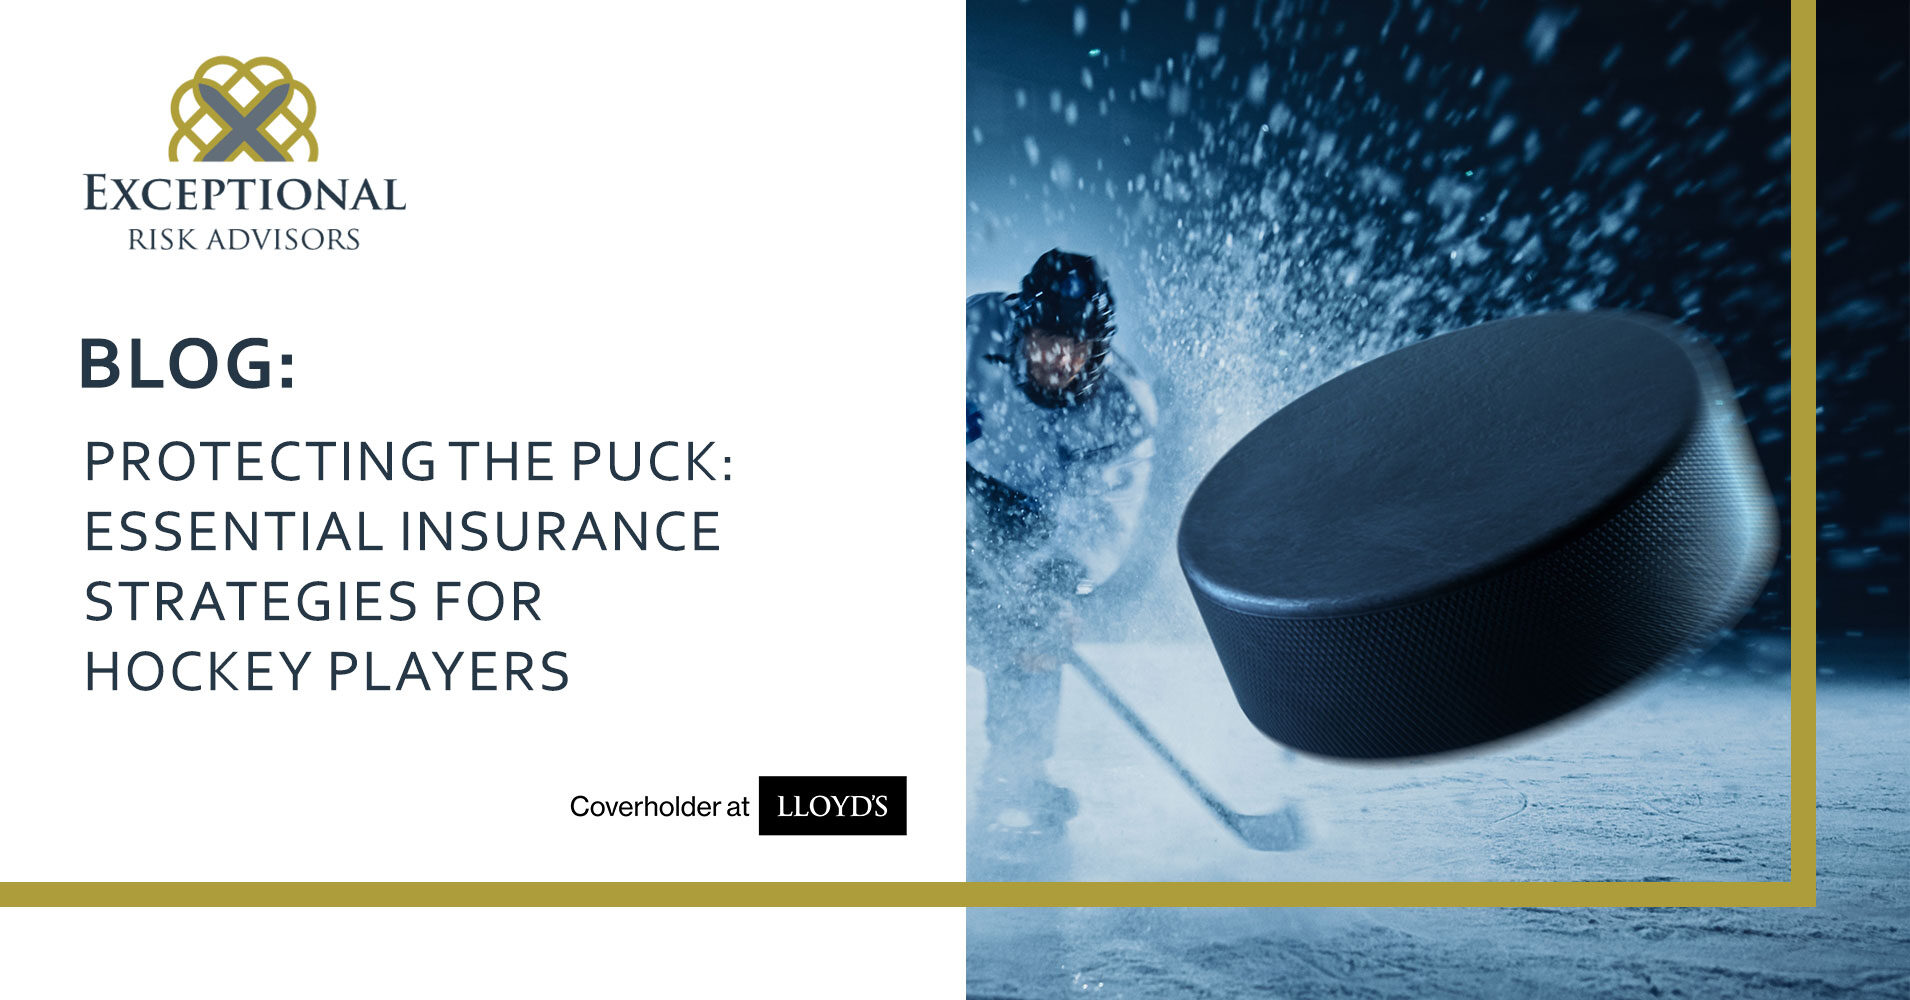 Disability Insurance for Professional Hockey Players